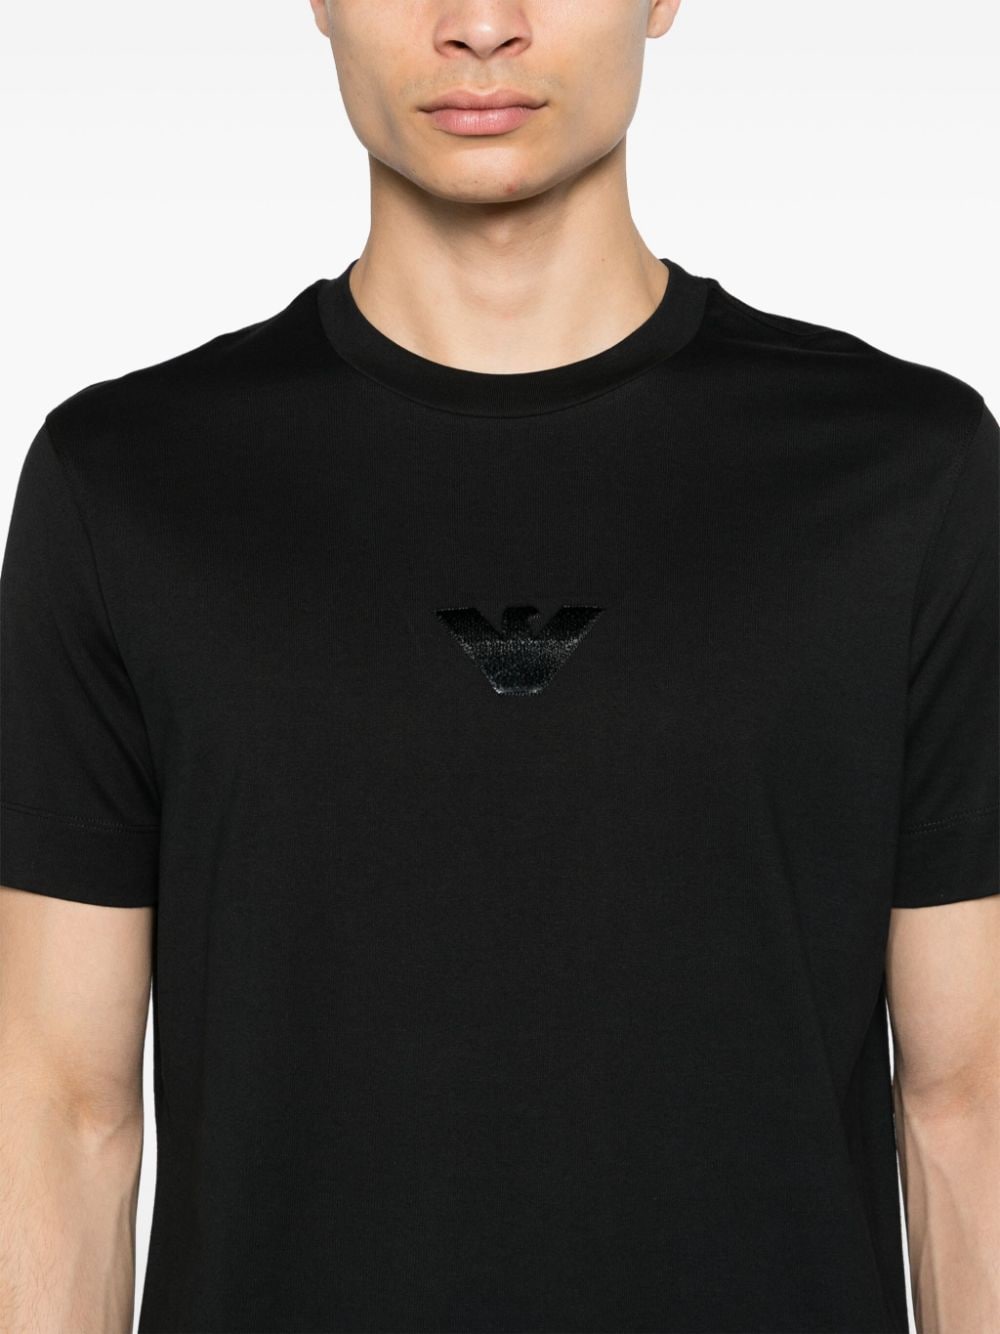 Black T-shirt with central Eagle logo